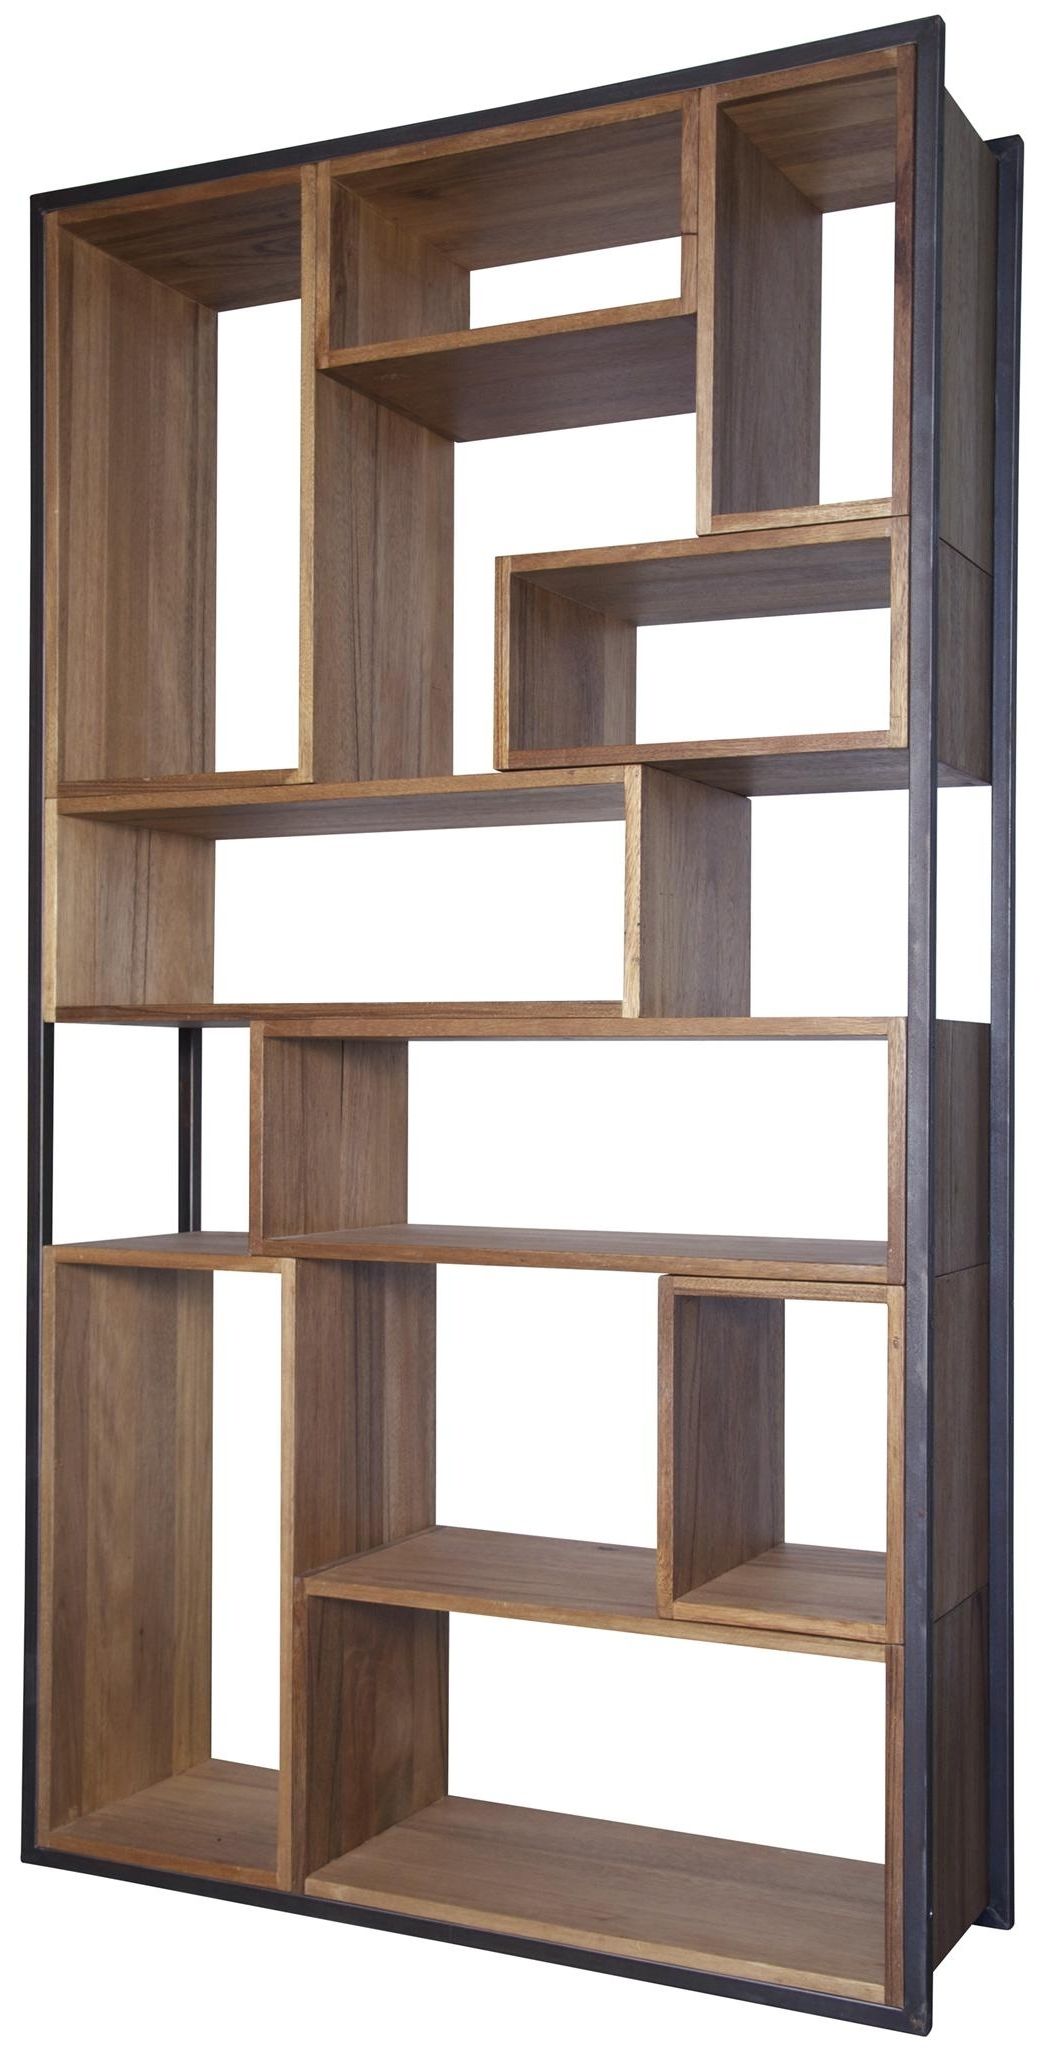 Current Wood And Metal Bookcase: A Book Storage For Ultra Rustic And Regarding Metal And Wood Bookcases (View 12 of 15)